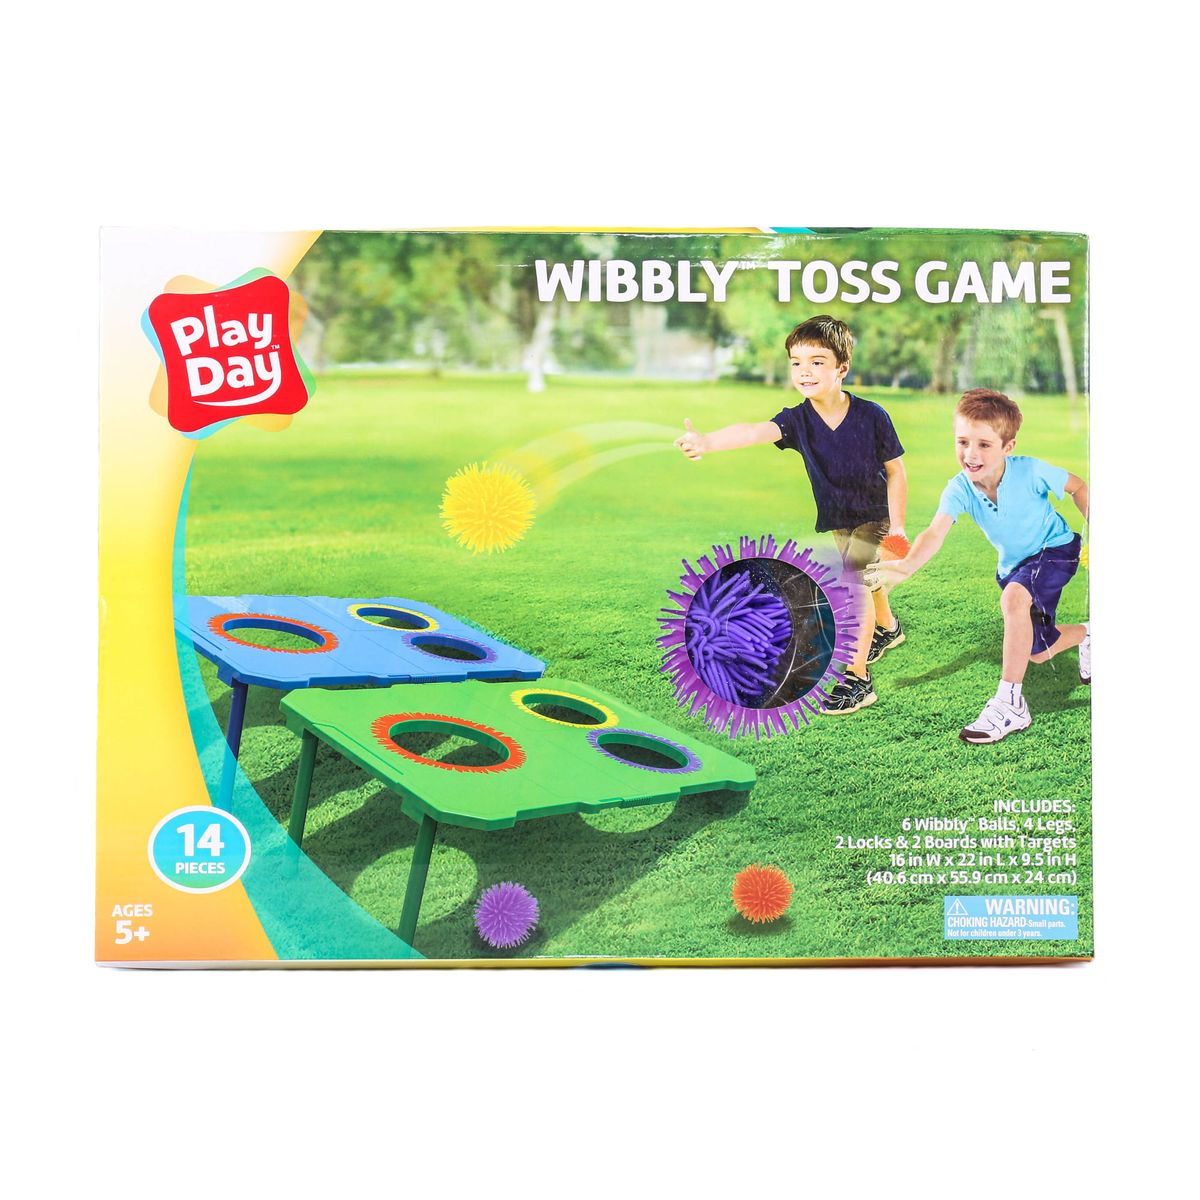 [RDY] [送料無料] Play Day Wibbly Toss Game [楽天海外通販] | Play Day Wibbly Toss Game